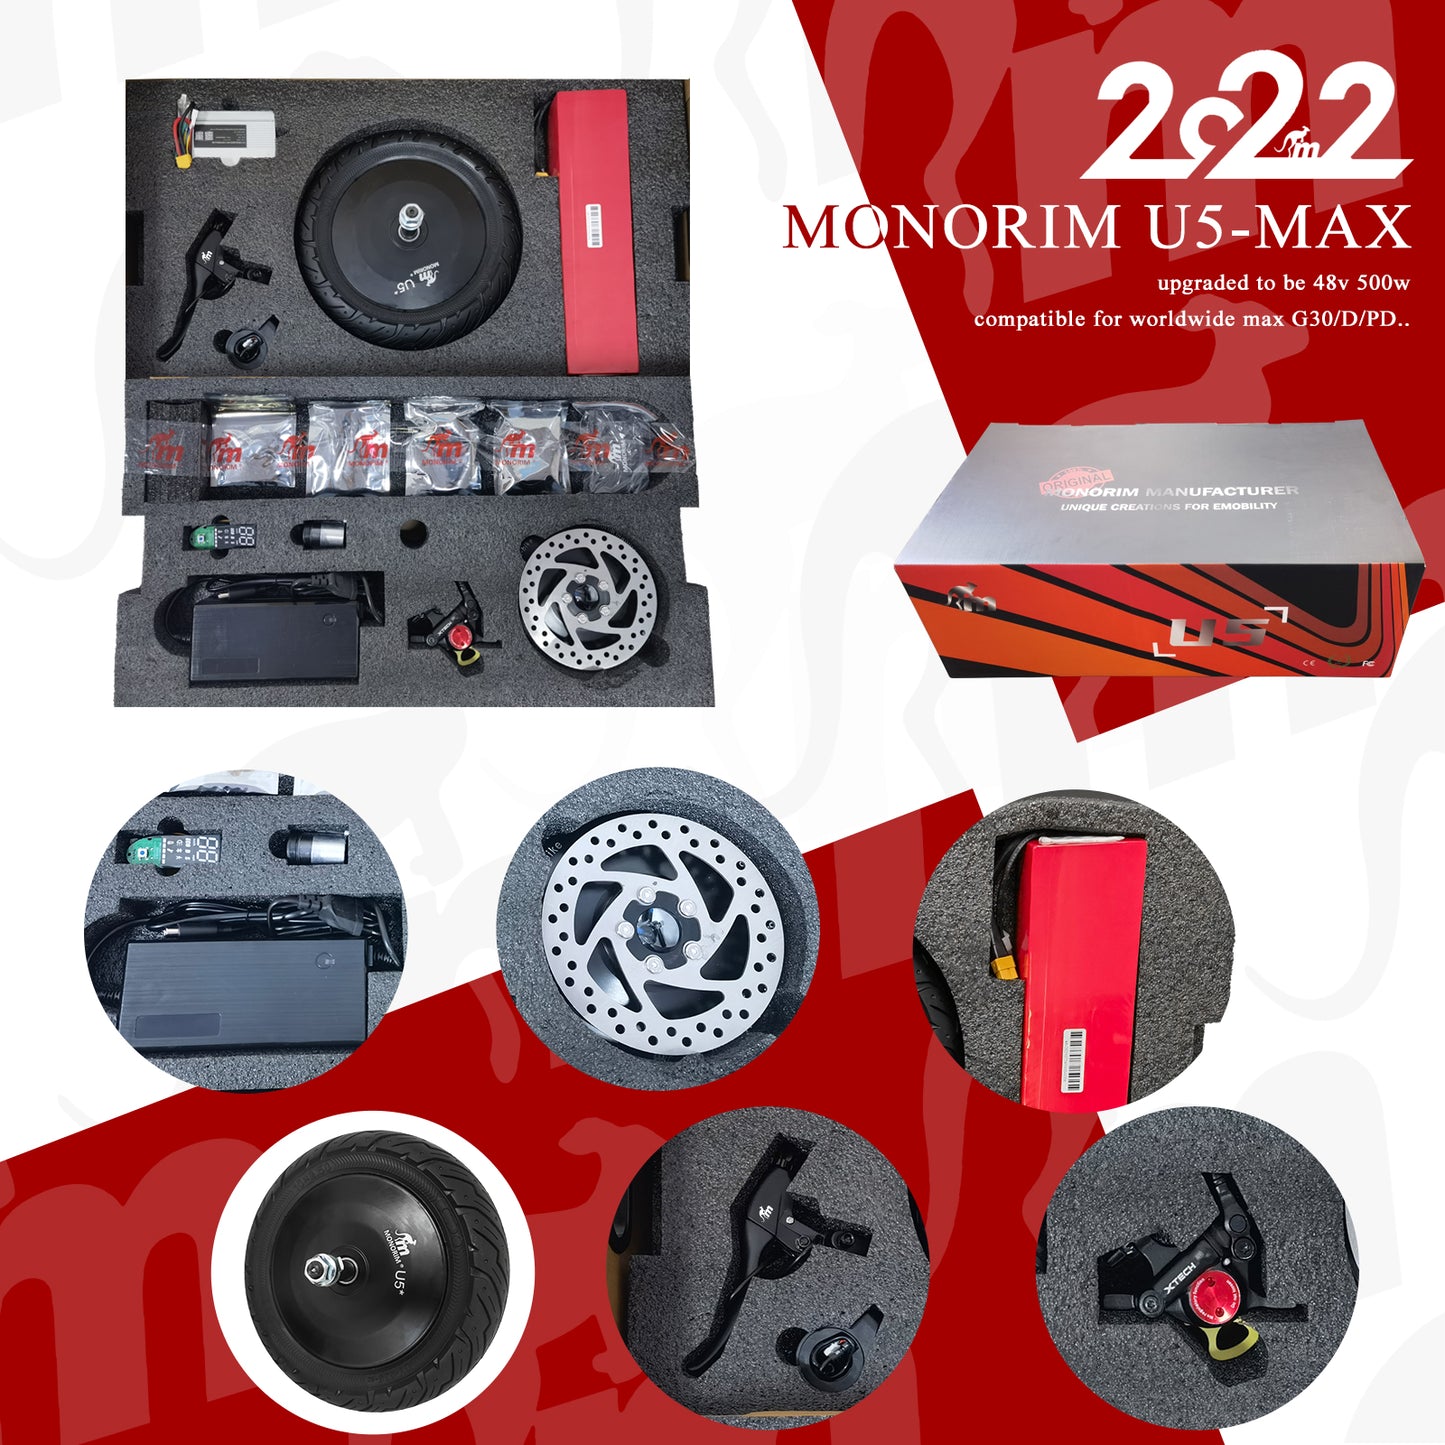 Monorim U5 V2.0 MAX Upgrade Kit to be 48v 500w for Segway Scooter Max G30 D/E/P/DII/LEII/LD/LE/LP Max Speed 50km/h